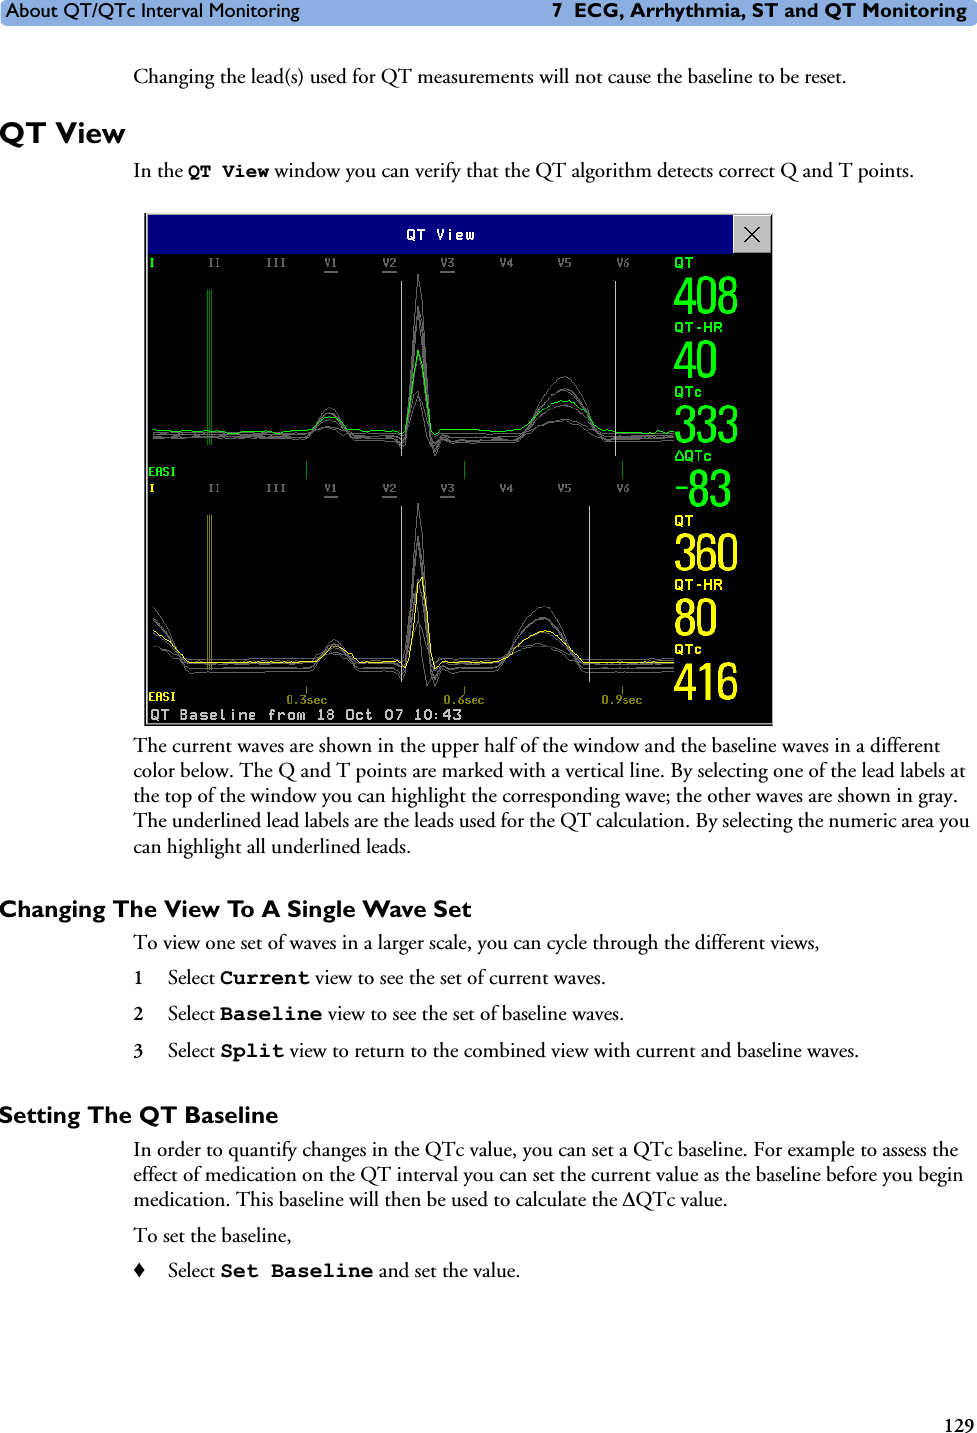 About QT/QTc Interval Monitoring 7 ECG, Arrhythmia, ST and QT Monitoring129Changing the lead(s) used for QT measurements will not cause the baseline to be reset. QT ViewIn the QT View window you can verify that the QT algorithm detects correct Q and T points. The current waves are shown in the upper half of the window and the baseline waves in a different color below. The Q and T points are marked with a vertical line. By selecting one of the lead labels at the top of the window you can highlight the corresponding wave; the other waves are shown in gray. The underlined lead labels are the leads used for the QT calculation. By selecting the numeric area you can highlight all underlined leads. Changing The View To A Single Wave SetTo view one set of waves in a larger scale, you can cycle through the different views, 1Select Current view to see the set of current waves.2Select Baseline view to see the set of baseline waves. 3Select Split view to return to the combined view with current and baseline waves. Setting The QT BaselineIn order to quantify changes in the QTc value, you can set a QTc baseline. For example to assess the effect of medication on the QT interval you can set the current value as the baseline before you begin medication. This baseline will then be used to calculate the &apos;QTc value. To set the baseline, ♦Select Set Baseline and set the value. 